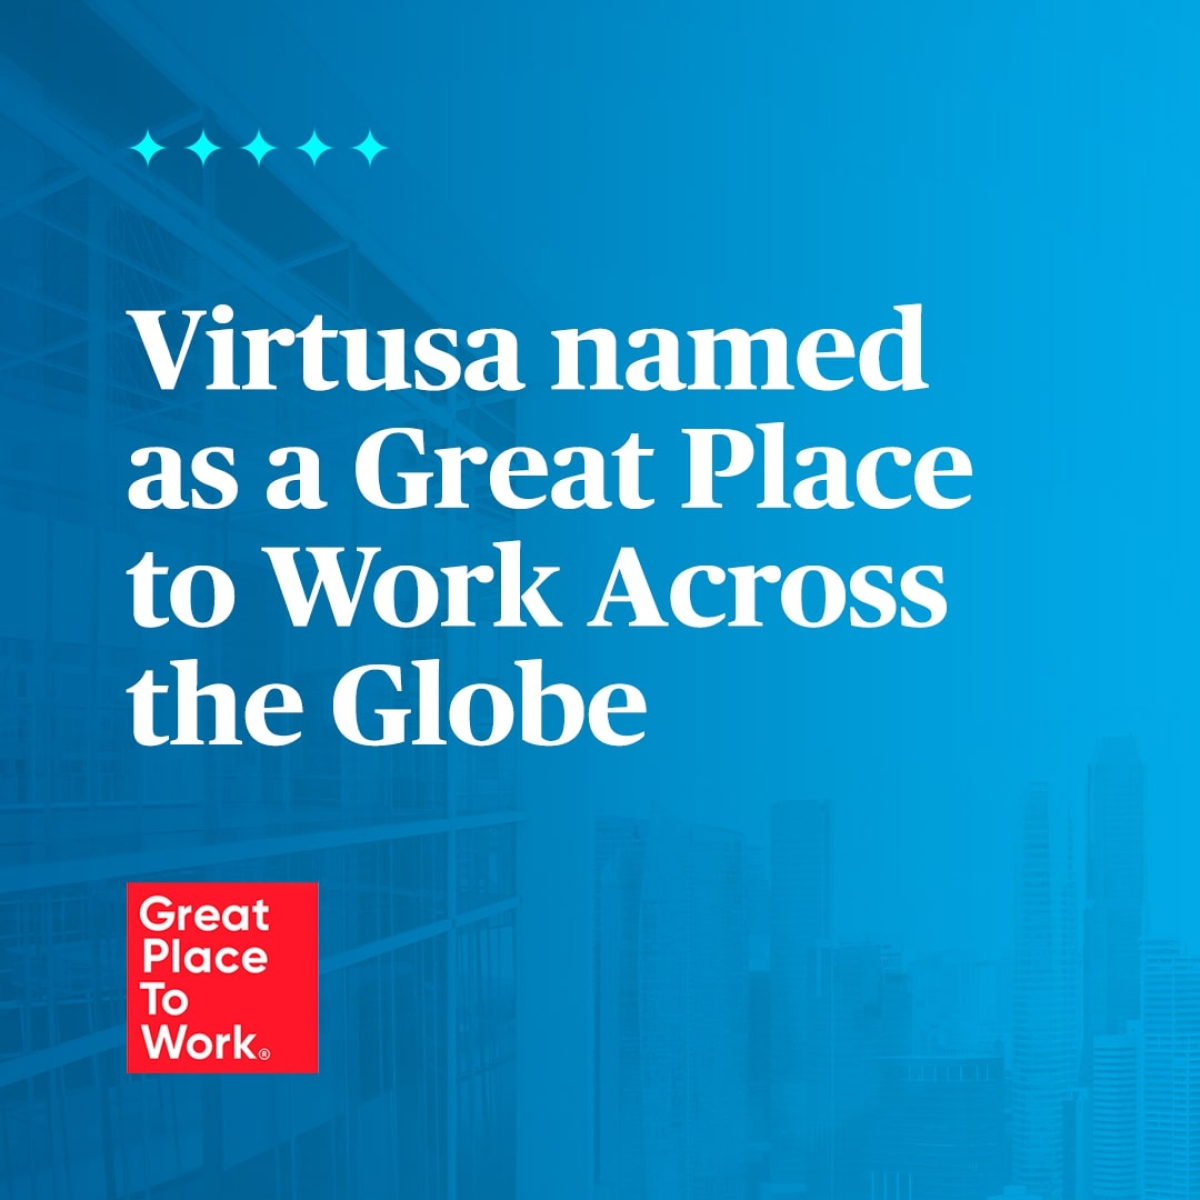 Virtusa Certified a Great Place to Work across the Globe